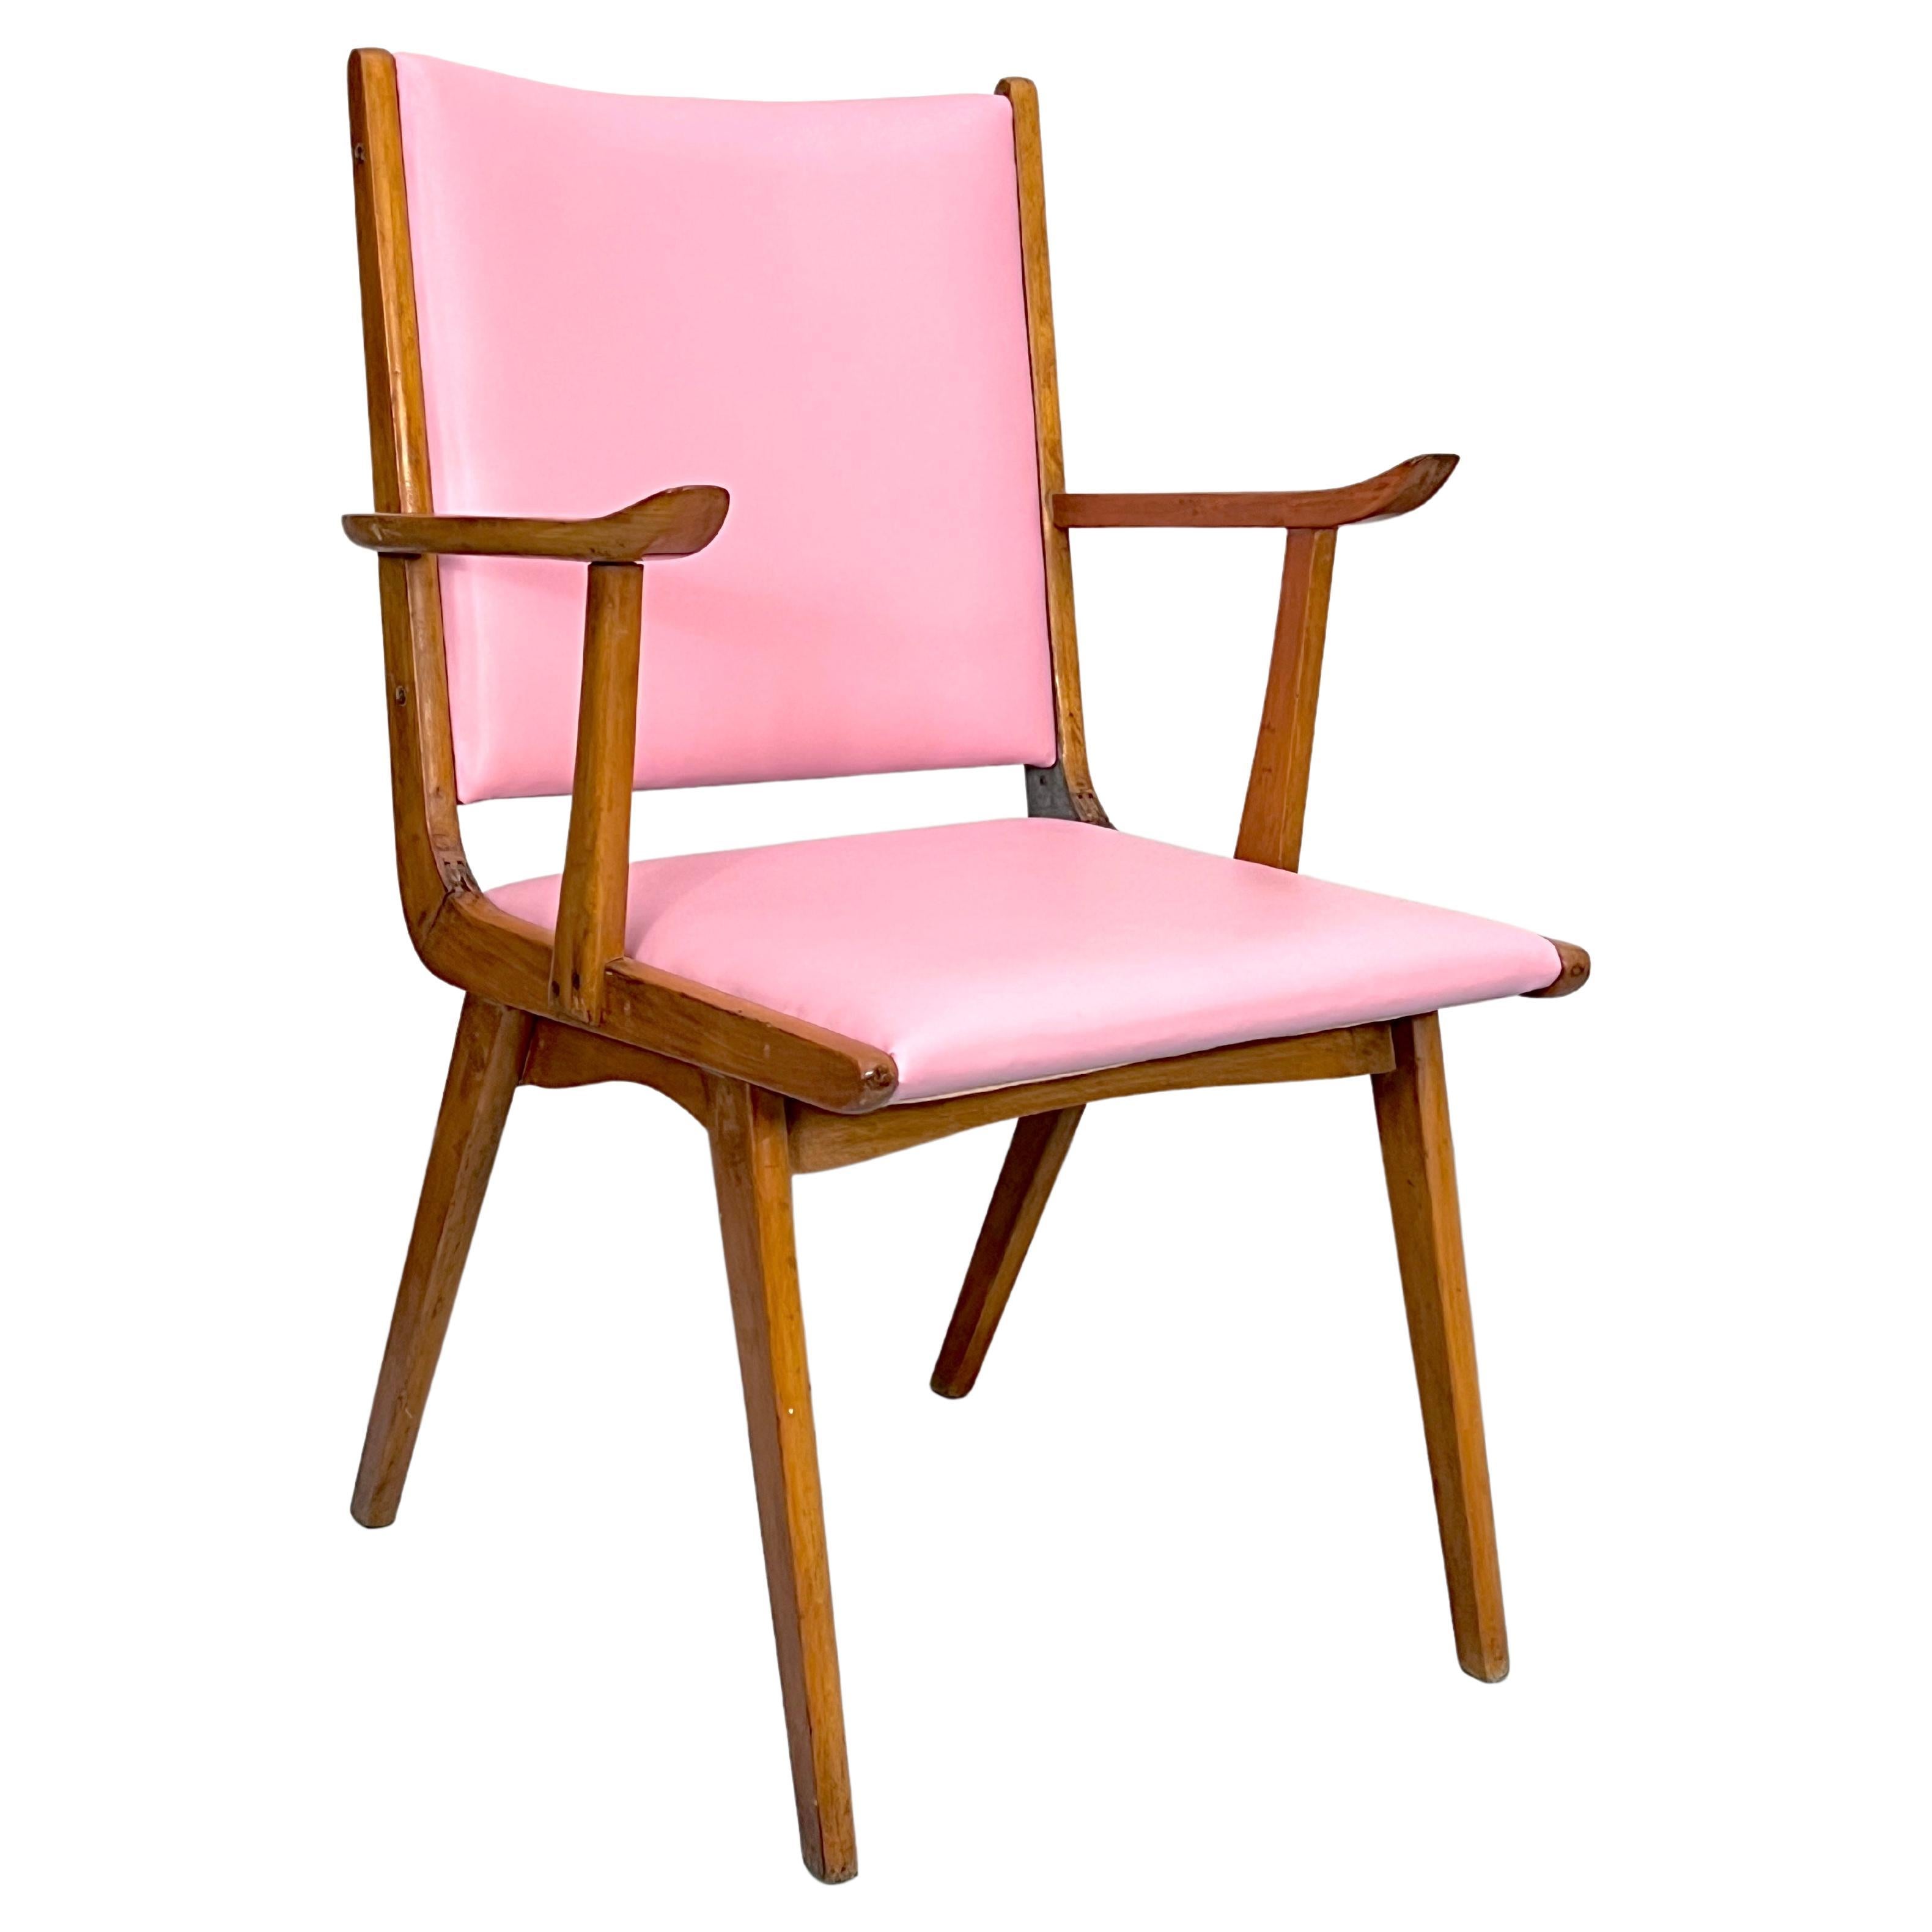 Vintage Italian Wood Accent Chair in Pink Leatherette, Italy, 1950s For Sale